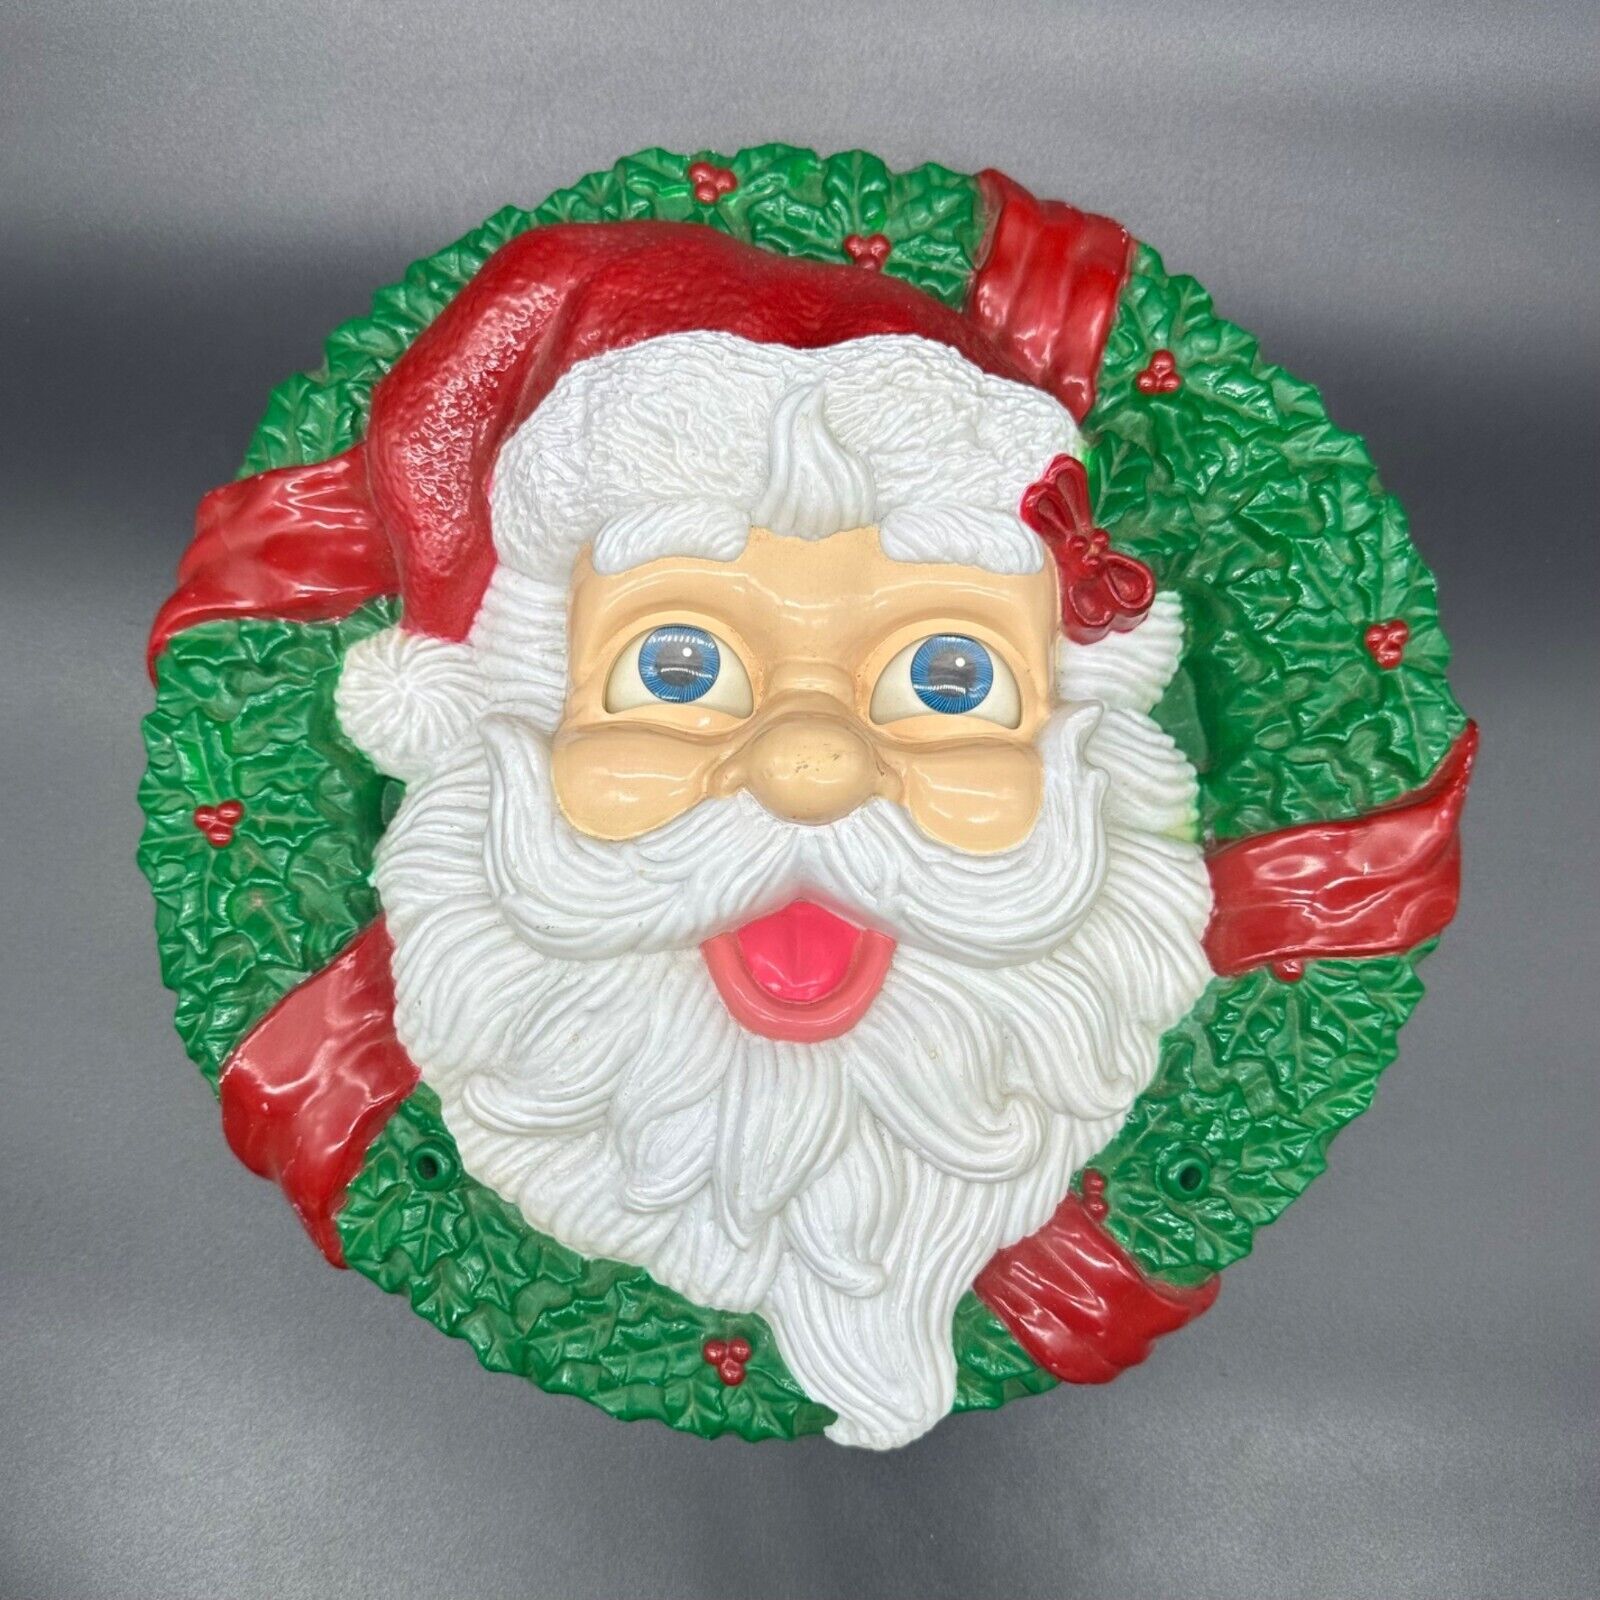 Vintage Santa Claus Wreath 1990s Motion Activated Moving Great American Fun Corp